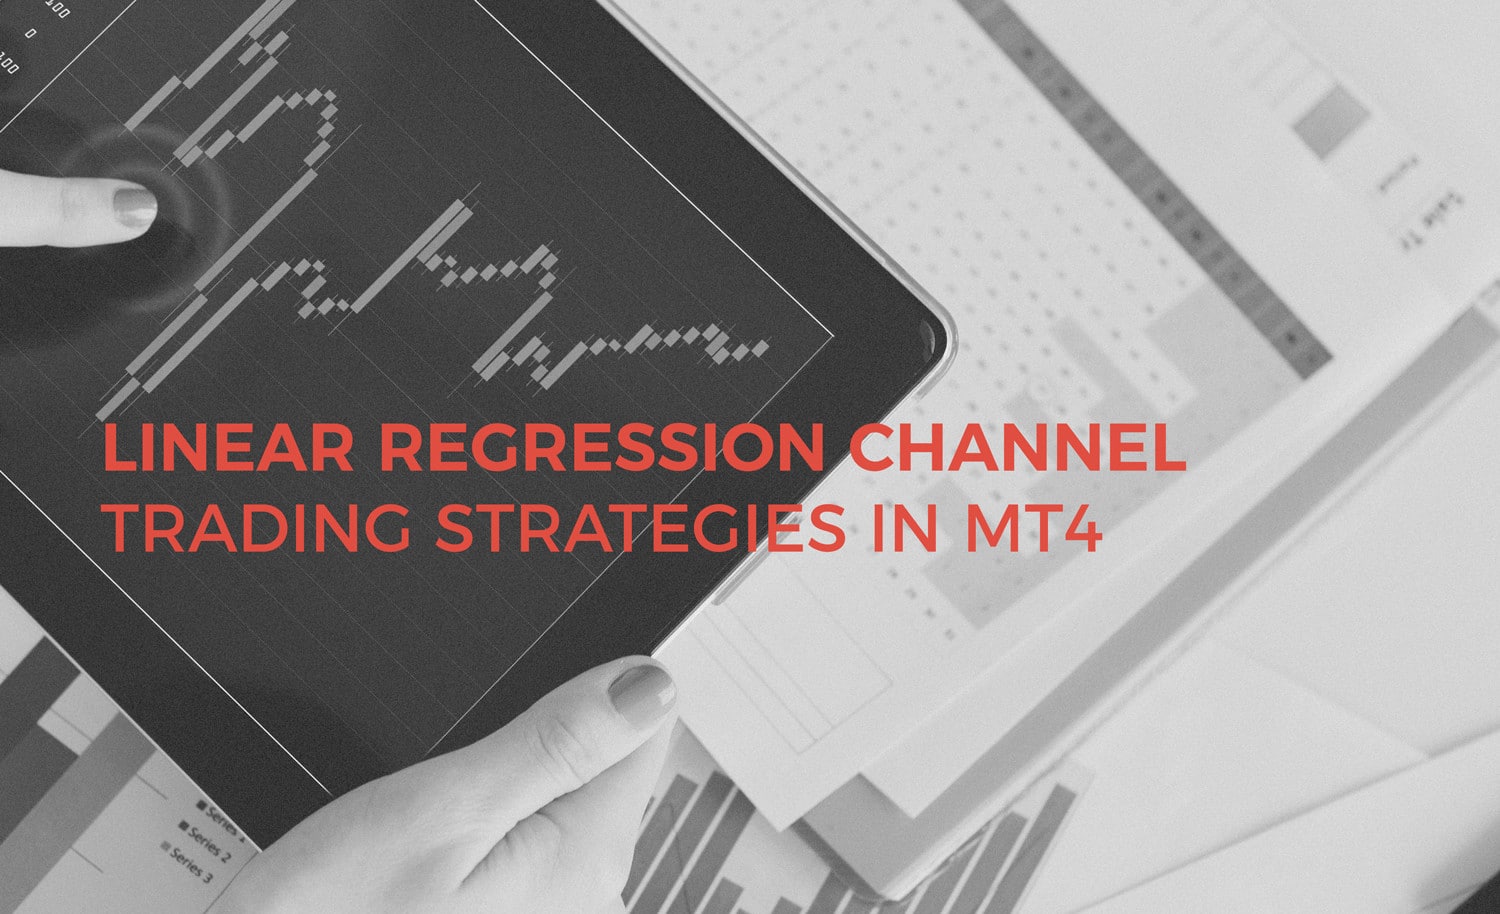 Linear Regression Channel Trading Strategies in MT4